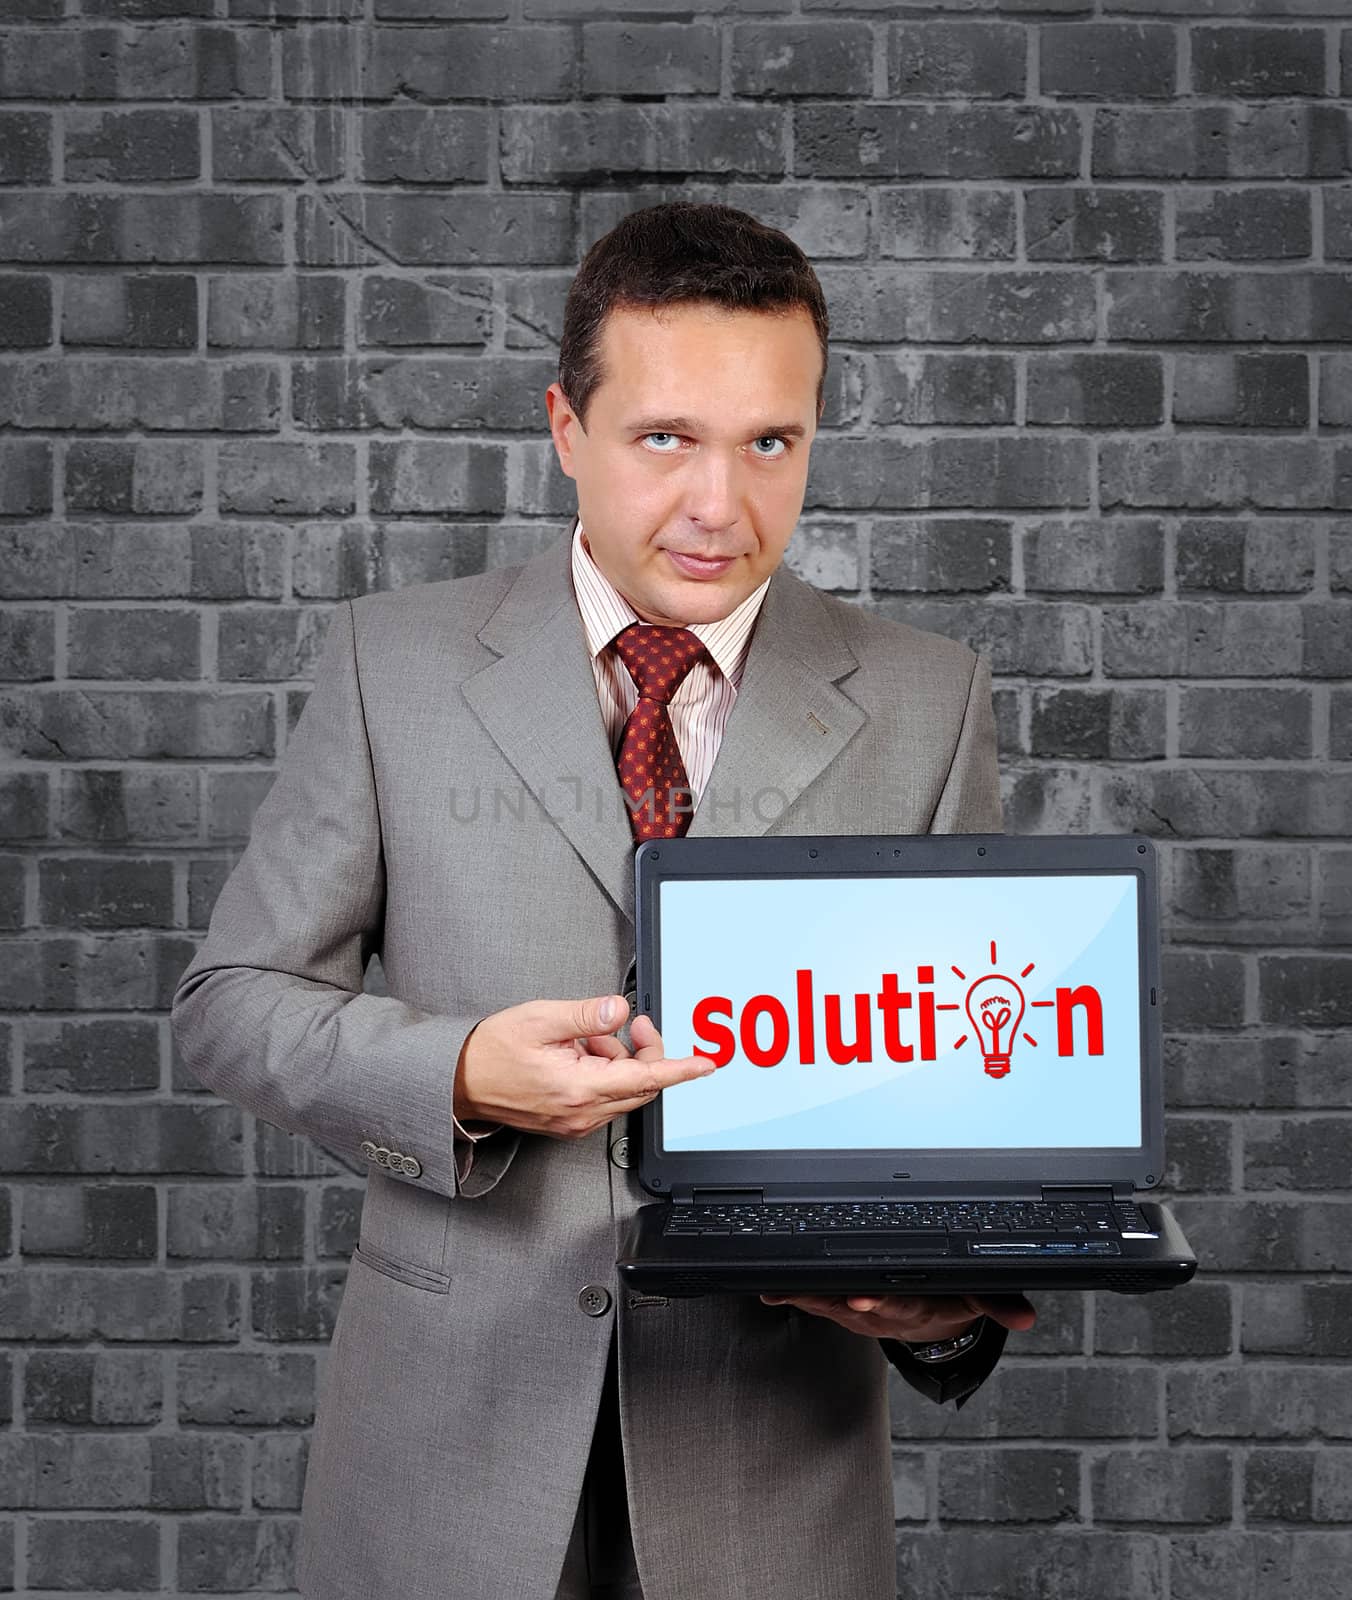 businessman with a laptop in hand points to solution symbol